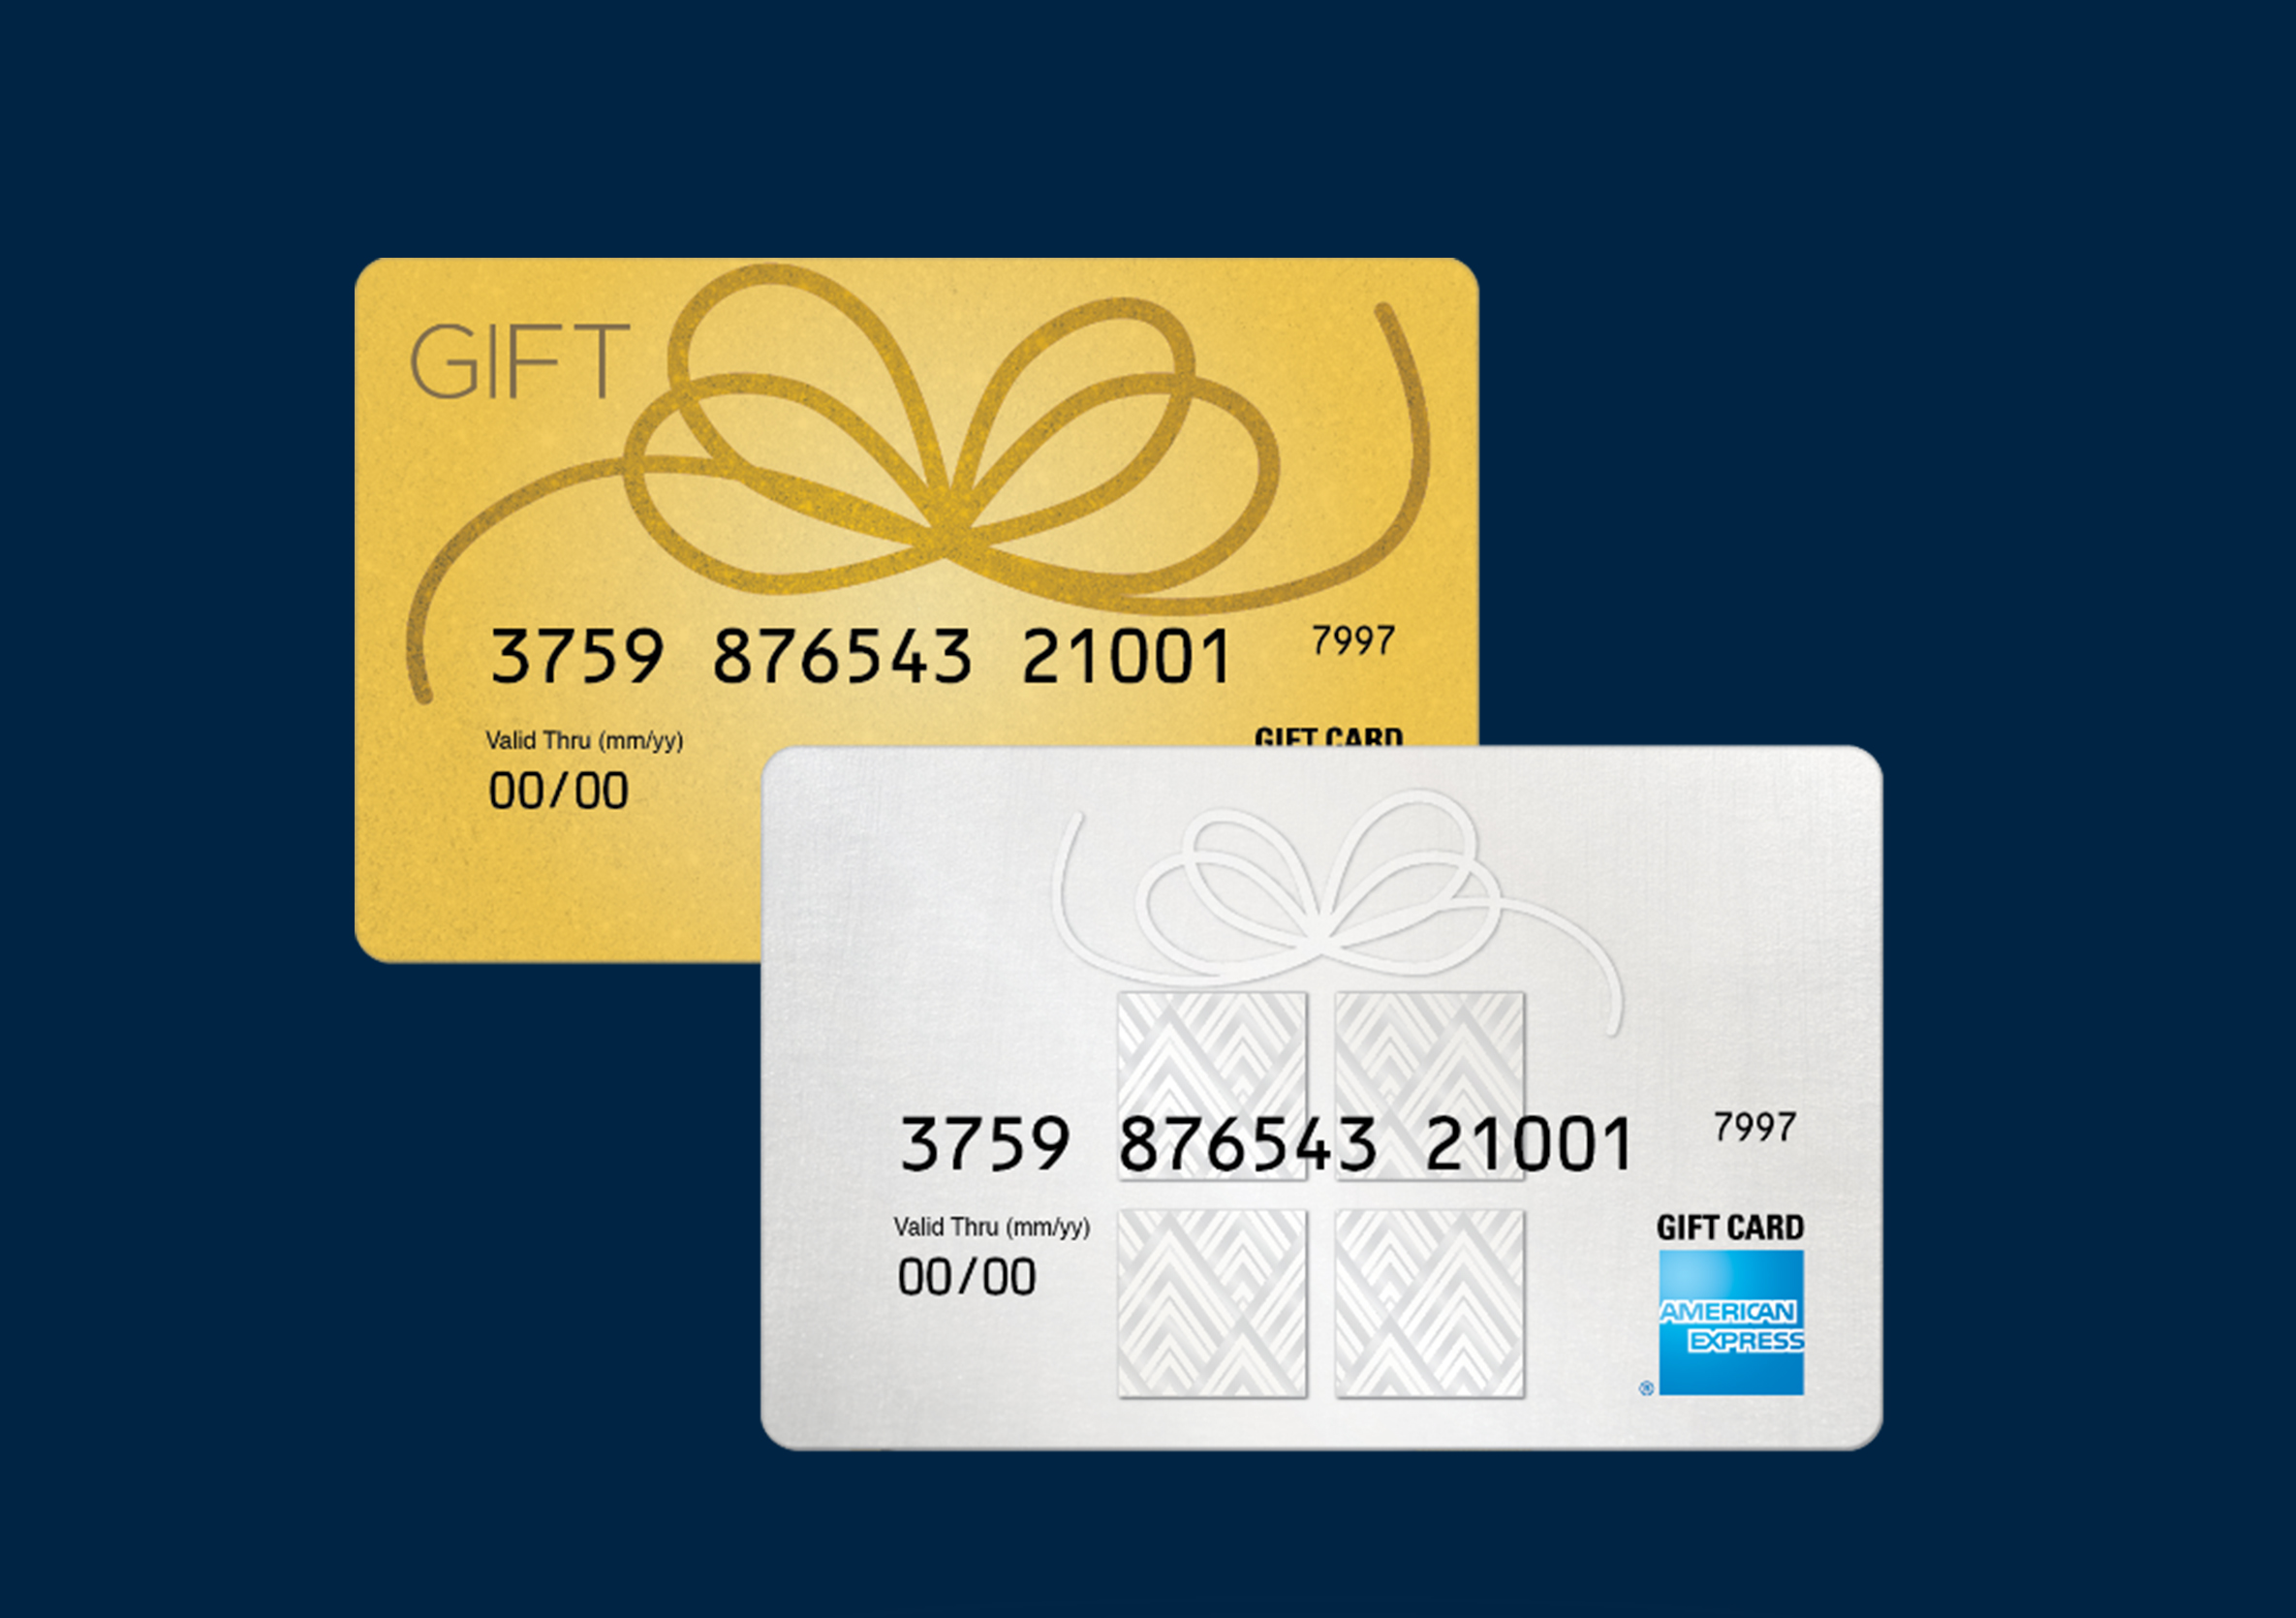 Different Pictures Of AMEX Gift Card And How To Identify Them - Nosh